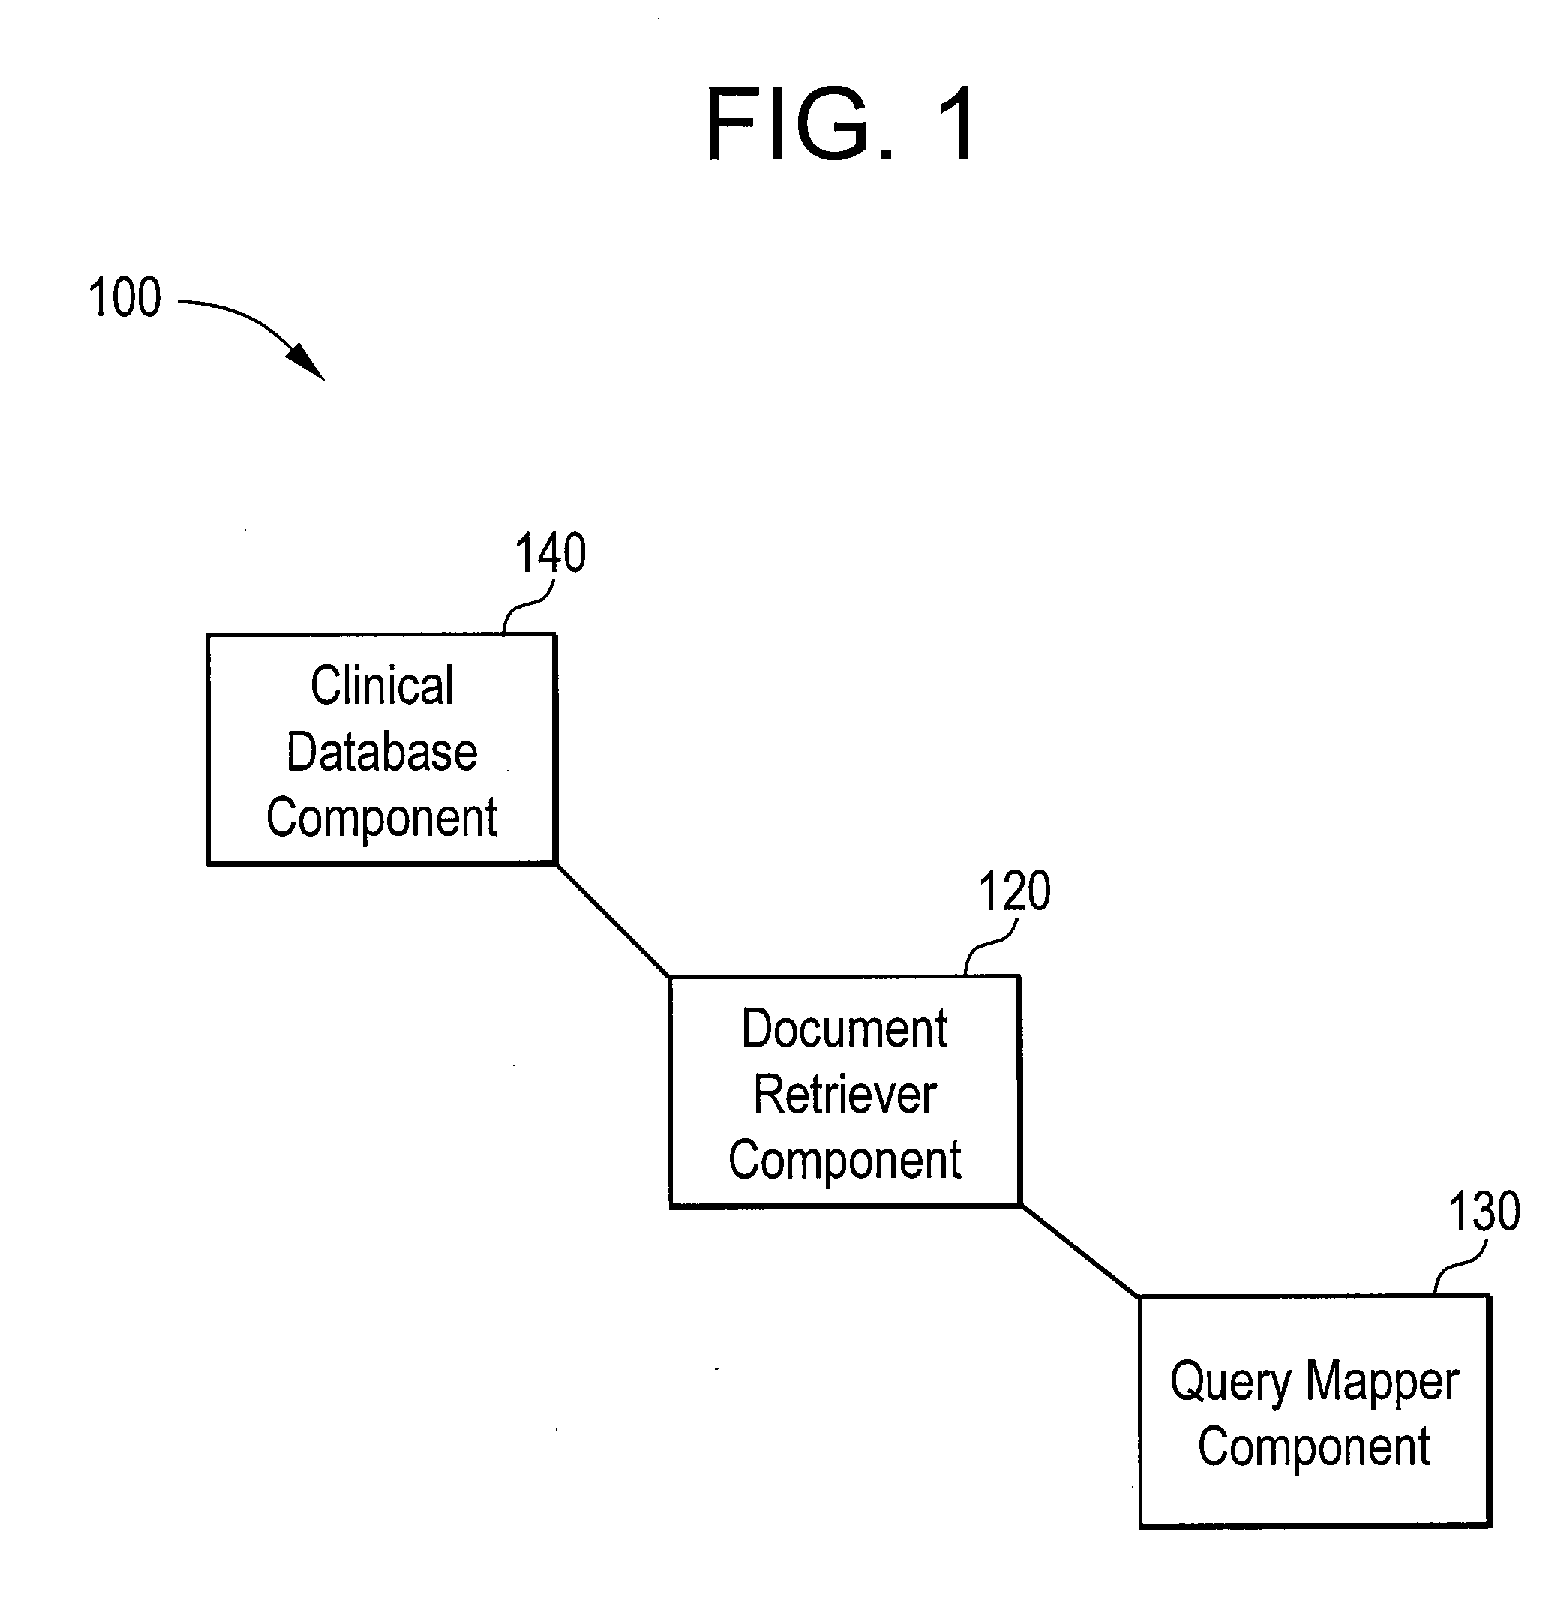 Systems and Methods for Storing and Locating Claim Reimbursement Attachments